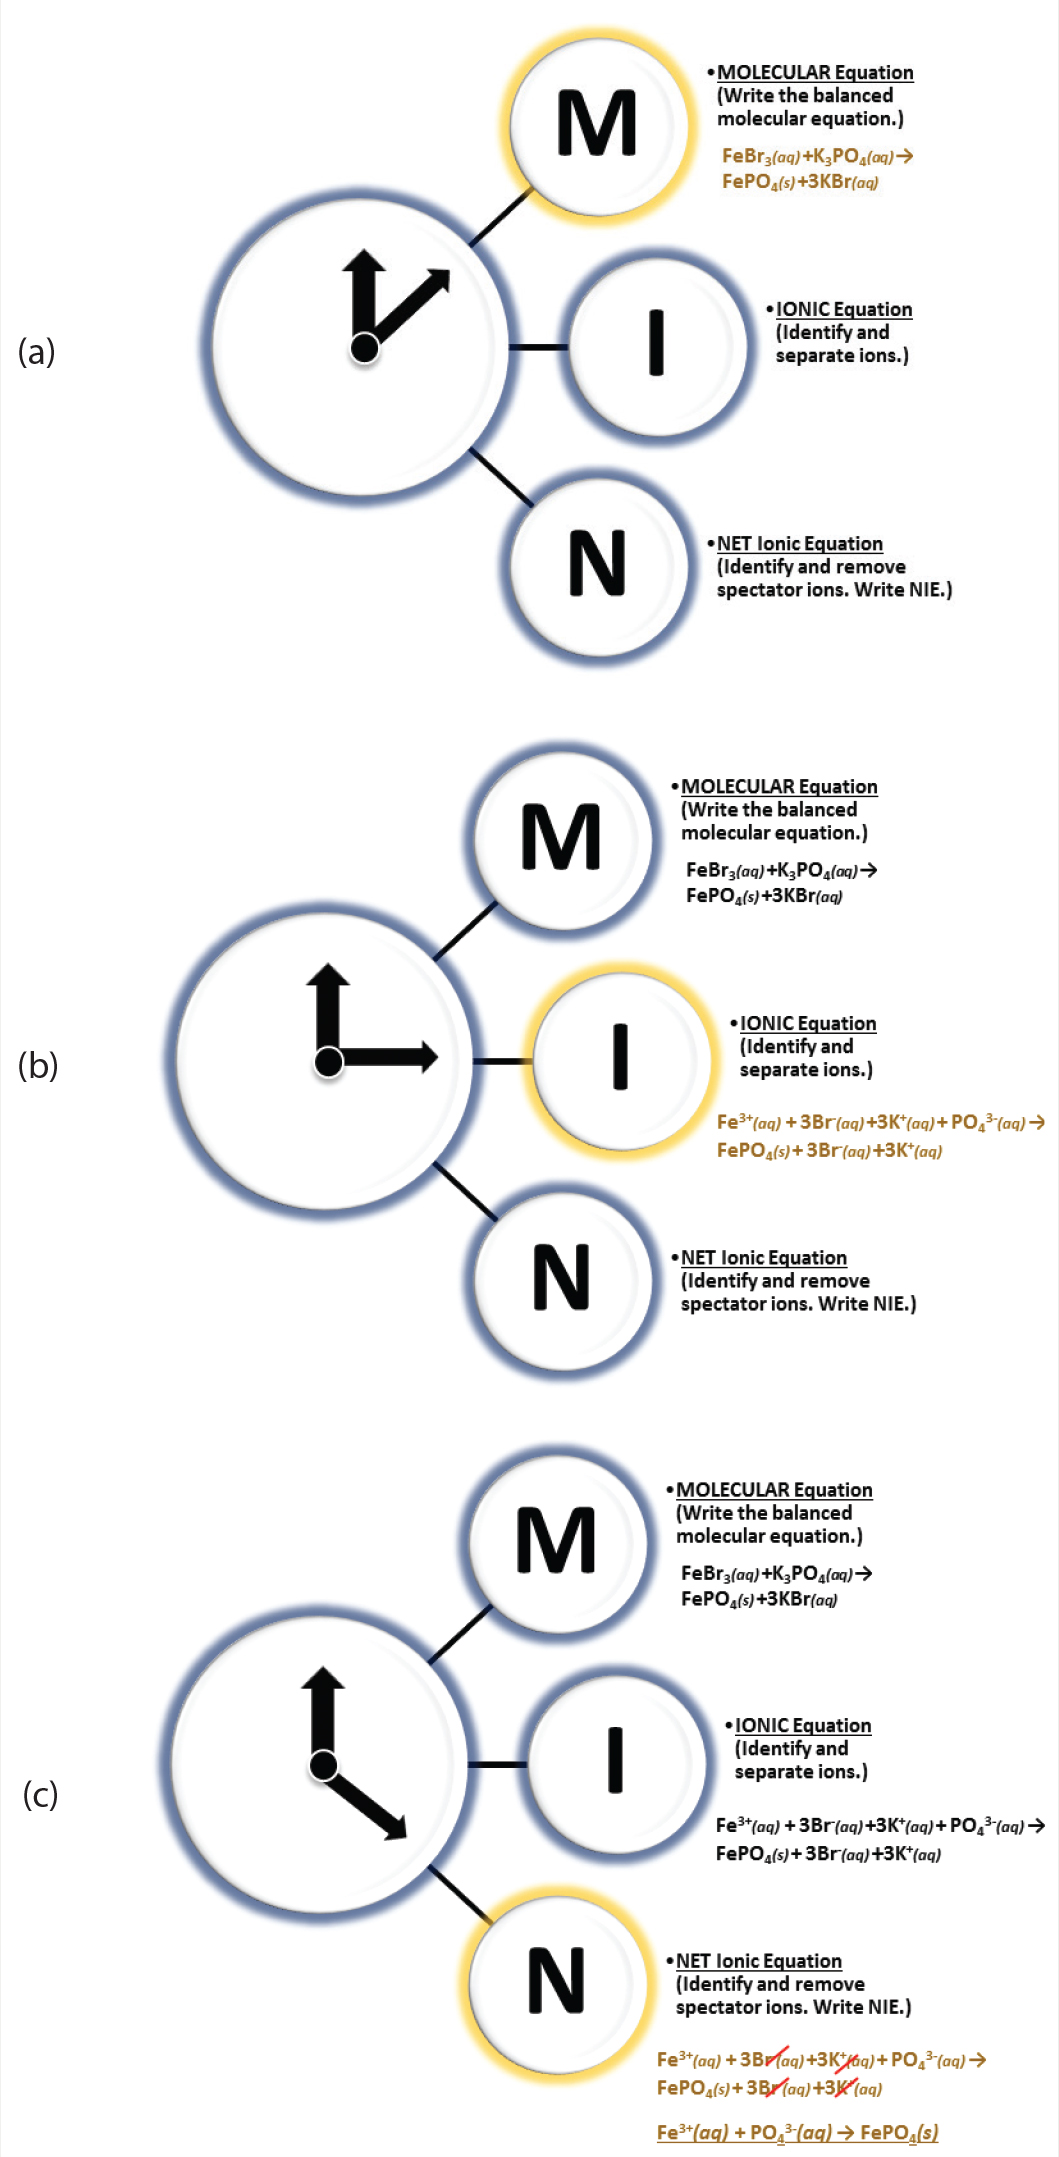 Diagrams of the “Take a MINute” and “Don’t touch the LeGS!” chemical mnemonic devices. (a) Illustrates the use of “M” of the mnemonic device (writing a balance MOLECULAR equation), (b) Shows “I” of the mnemonic device, providing students